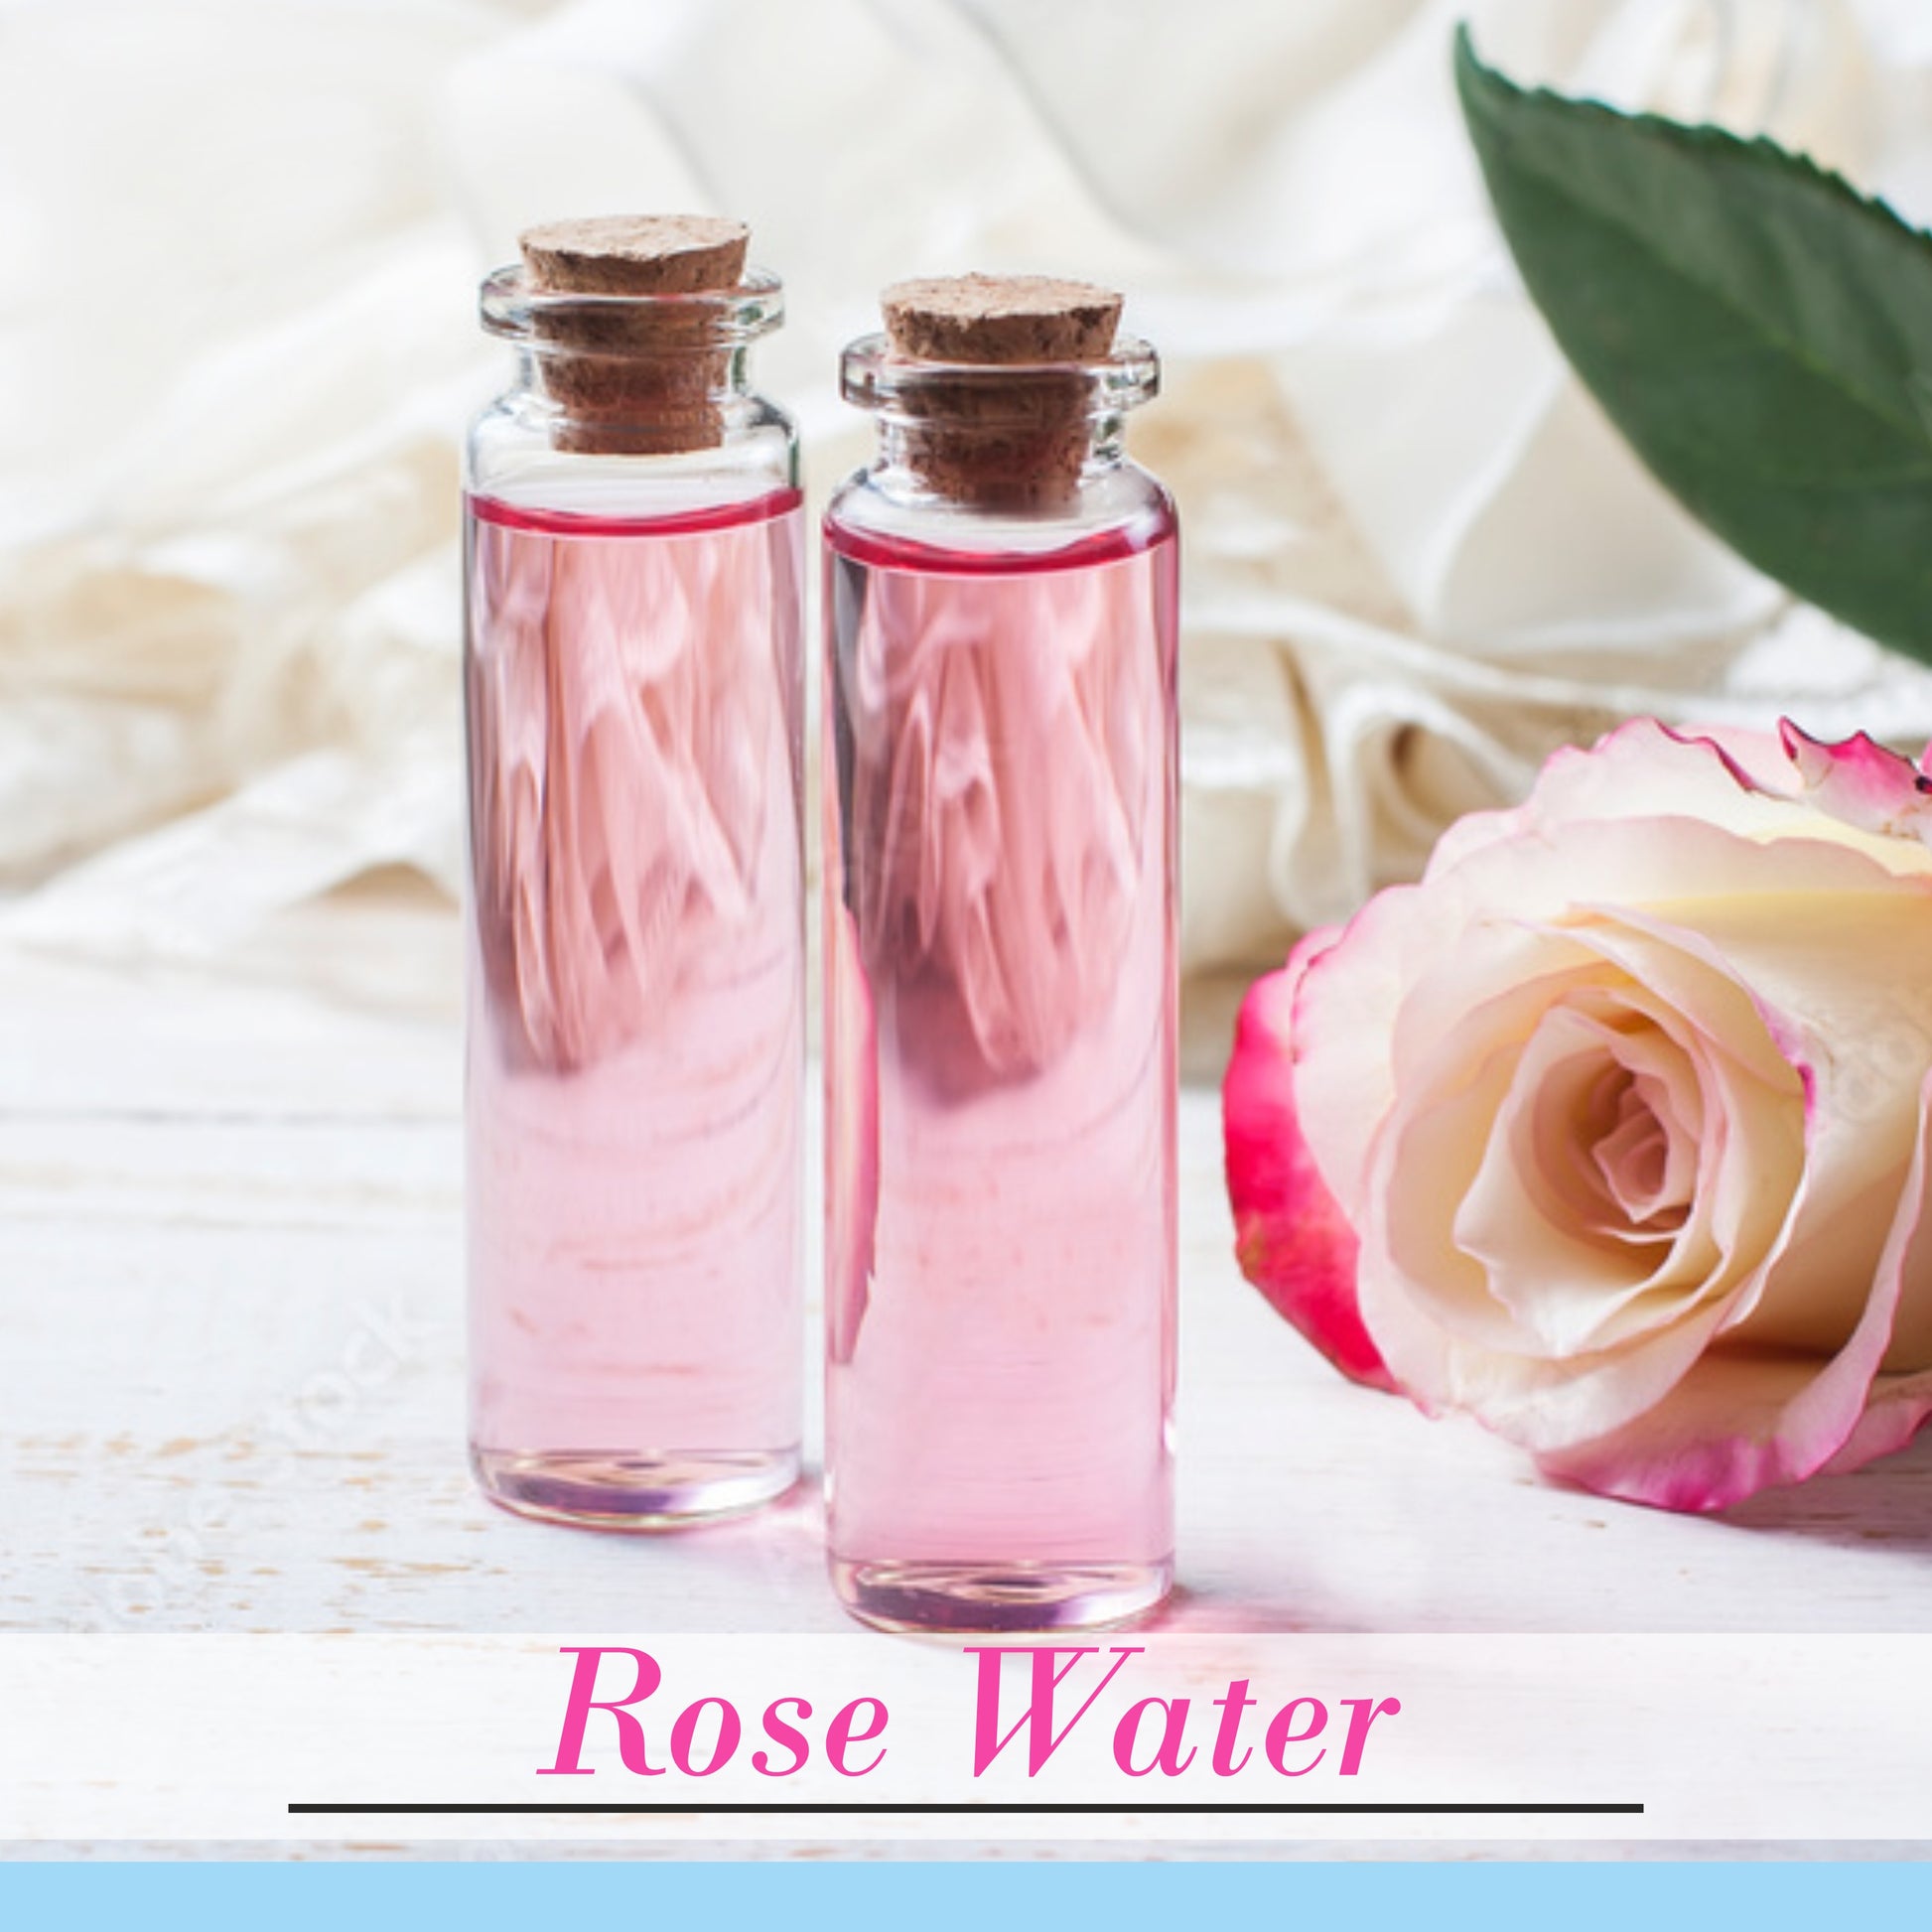 Rose water, rose water for skin, tonner, cleanser, organic rose water, chemical free rose water, rose water for face, best rose water, makeup cleaner, hydrating, rose water for skin, face cleanser, cosmetic making, ingredients, cosmetic making ingredients